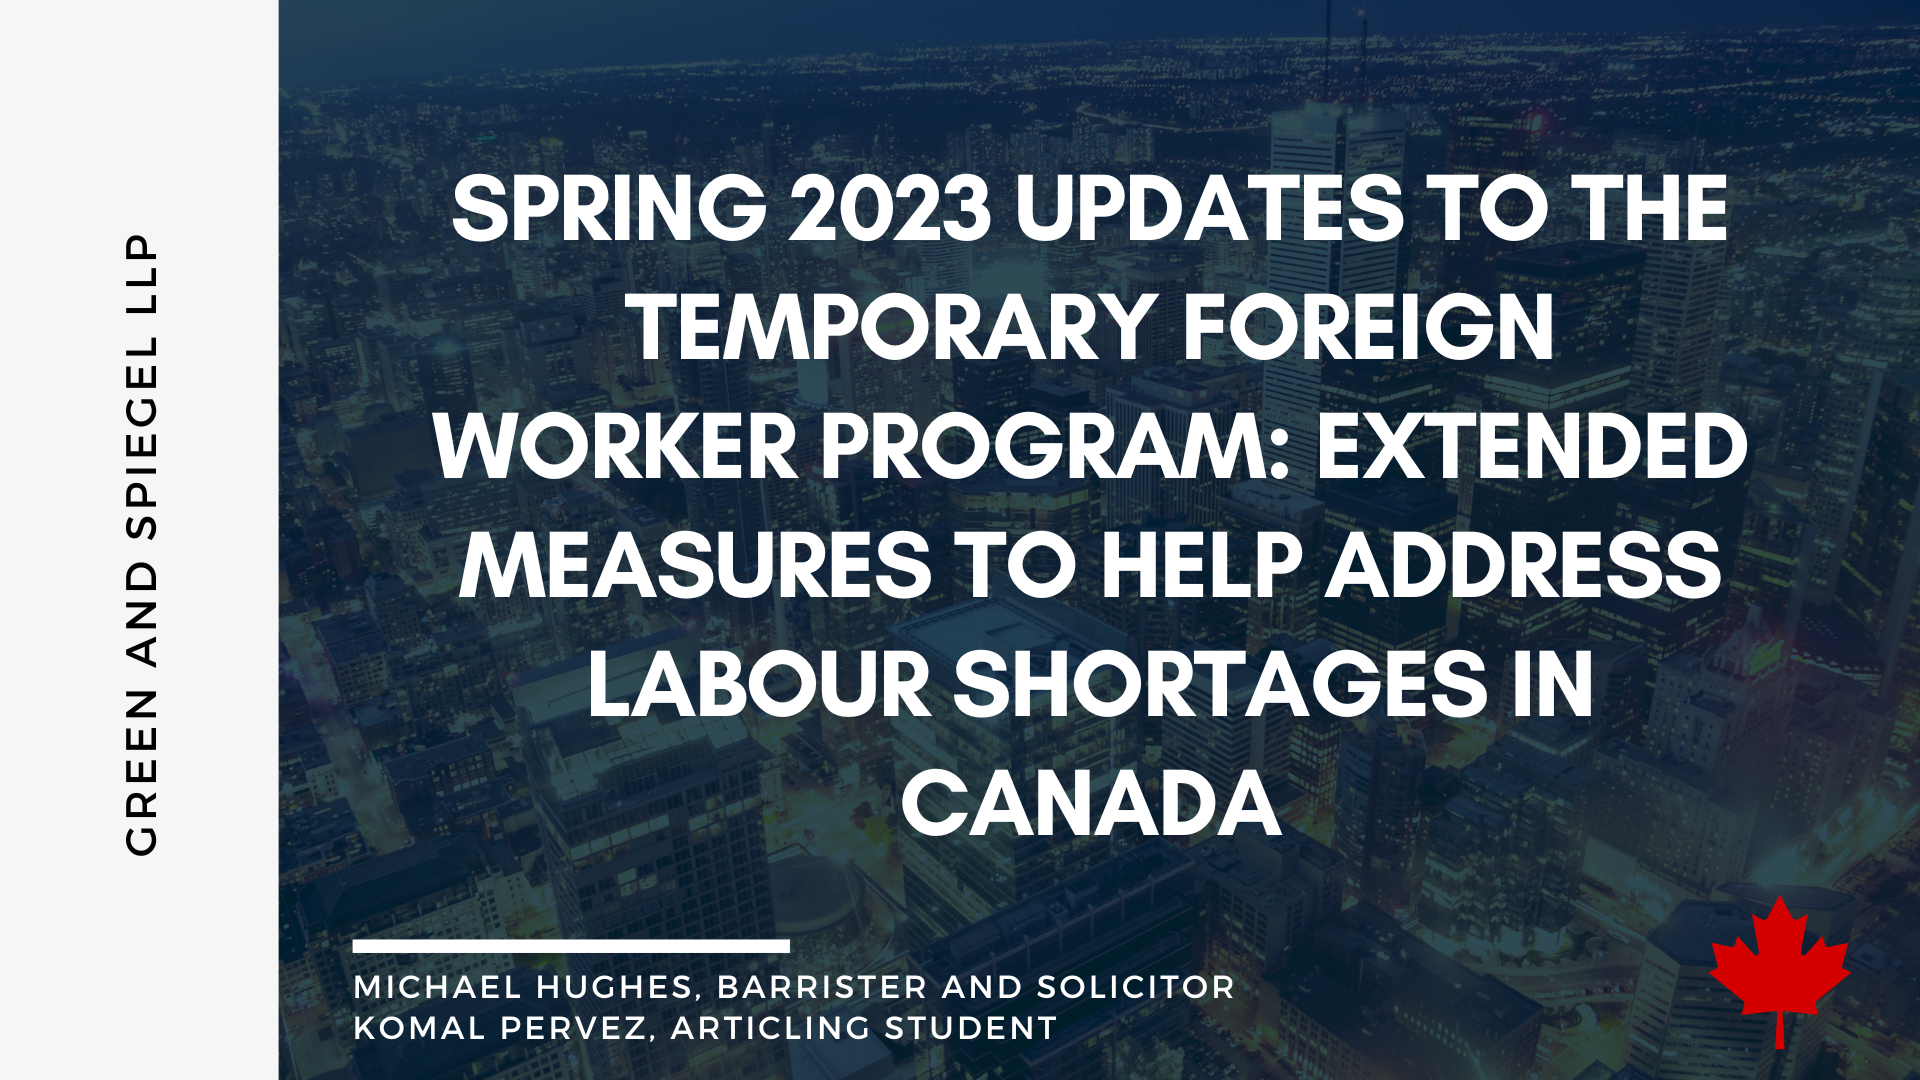 SPRING 2023 UPDATES TO THE TEMPORARY FOREIGN WORKER PROGRAM: EXTENDED MEASURES TO HELP ADDRESS LABOUR SHORTAGES IN CANADA